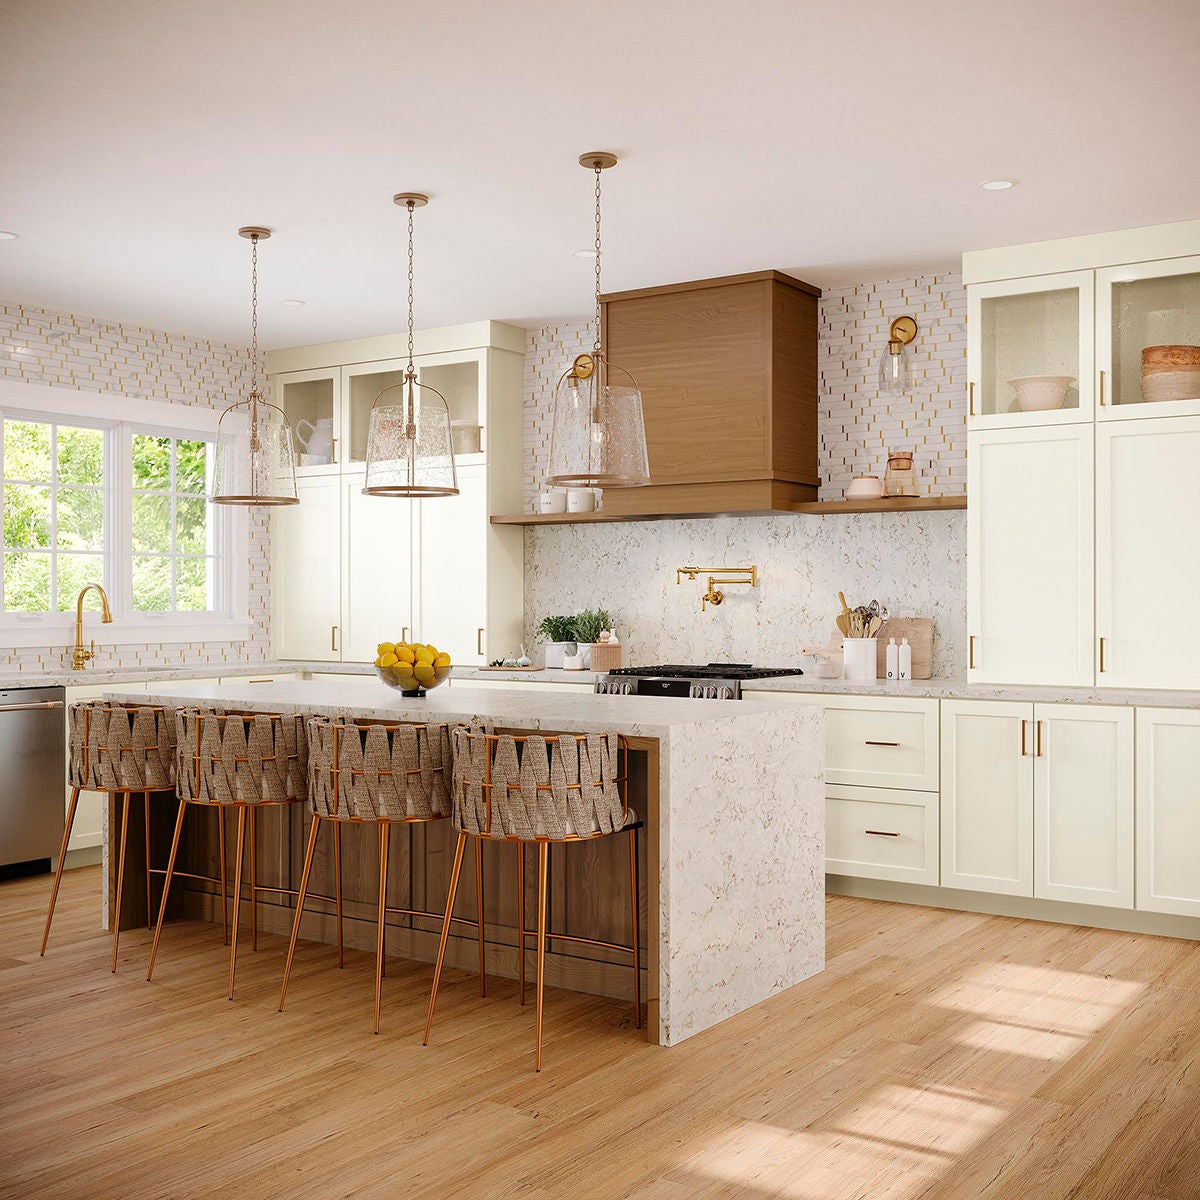 How To Design A Two-Toned Kitchen